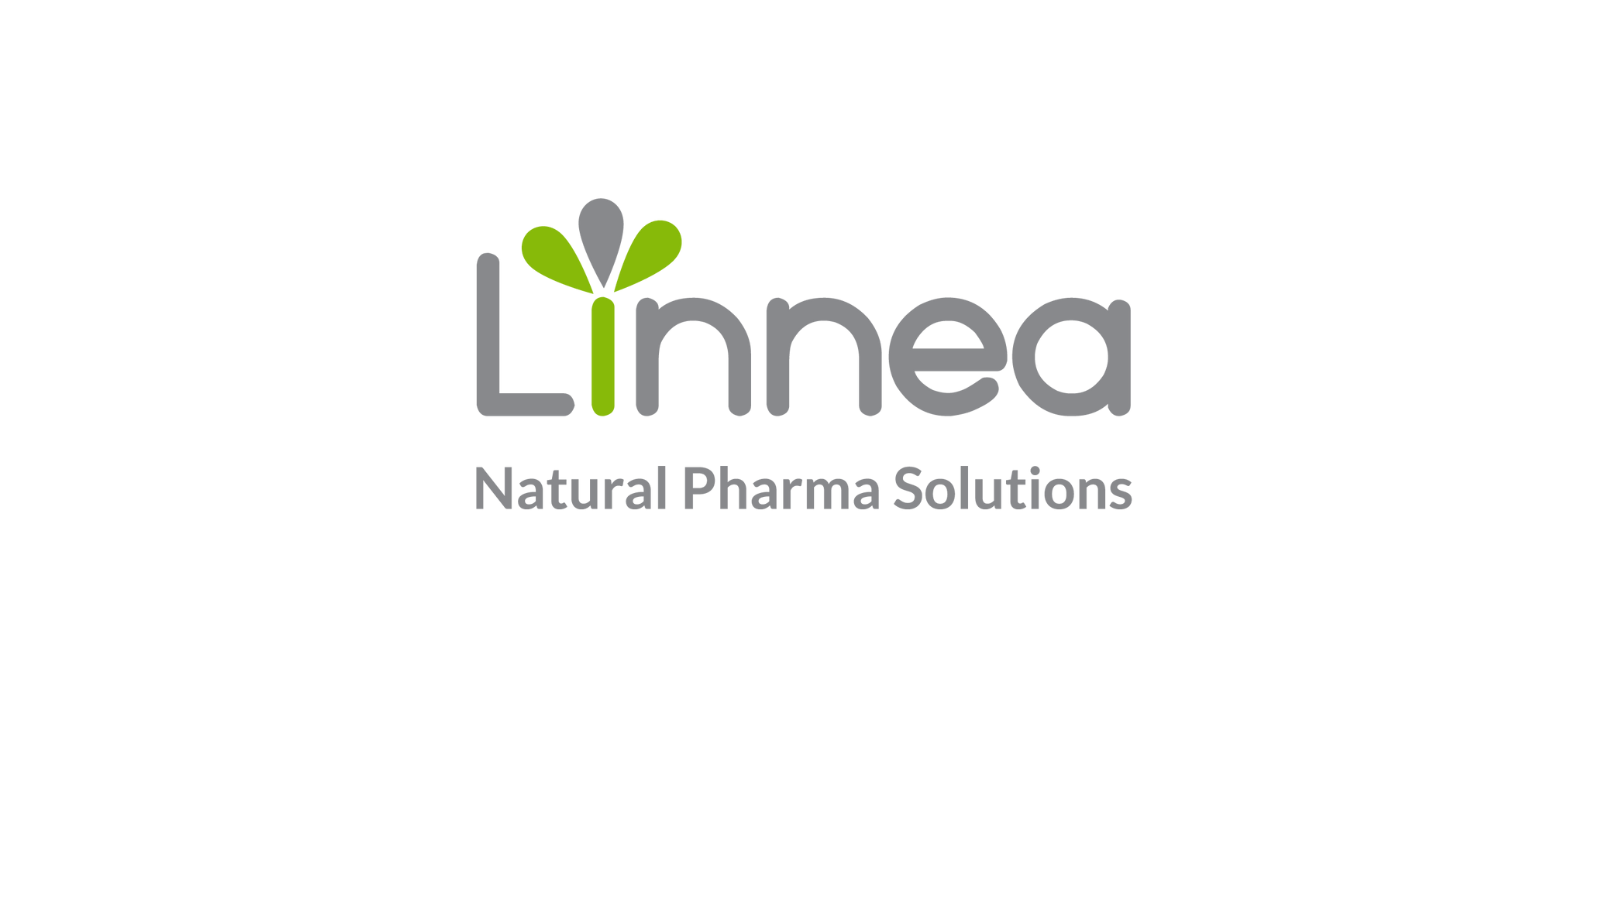 Swissmedic grants Linnea a narcotics license. Allowing them to now be one of the first to produce and export GMP Certified High THC APIs.